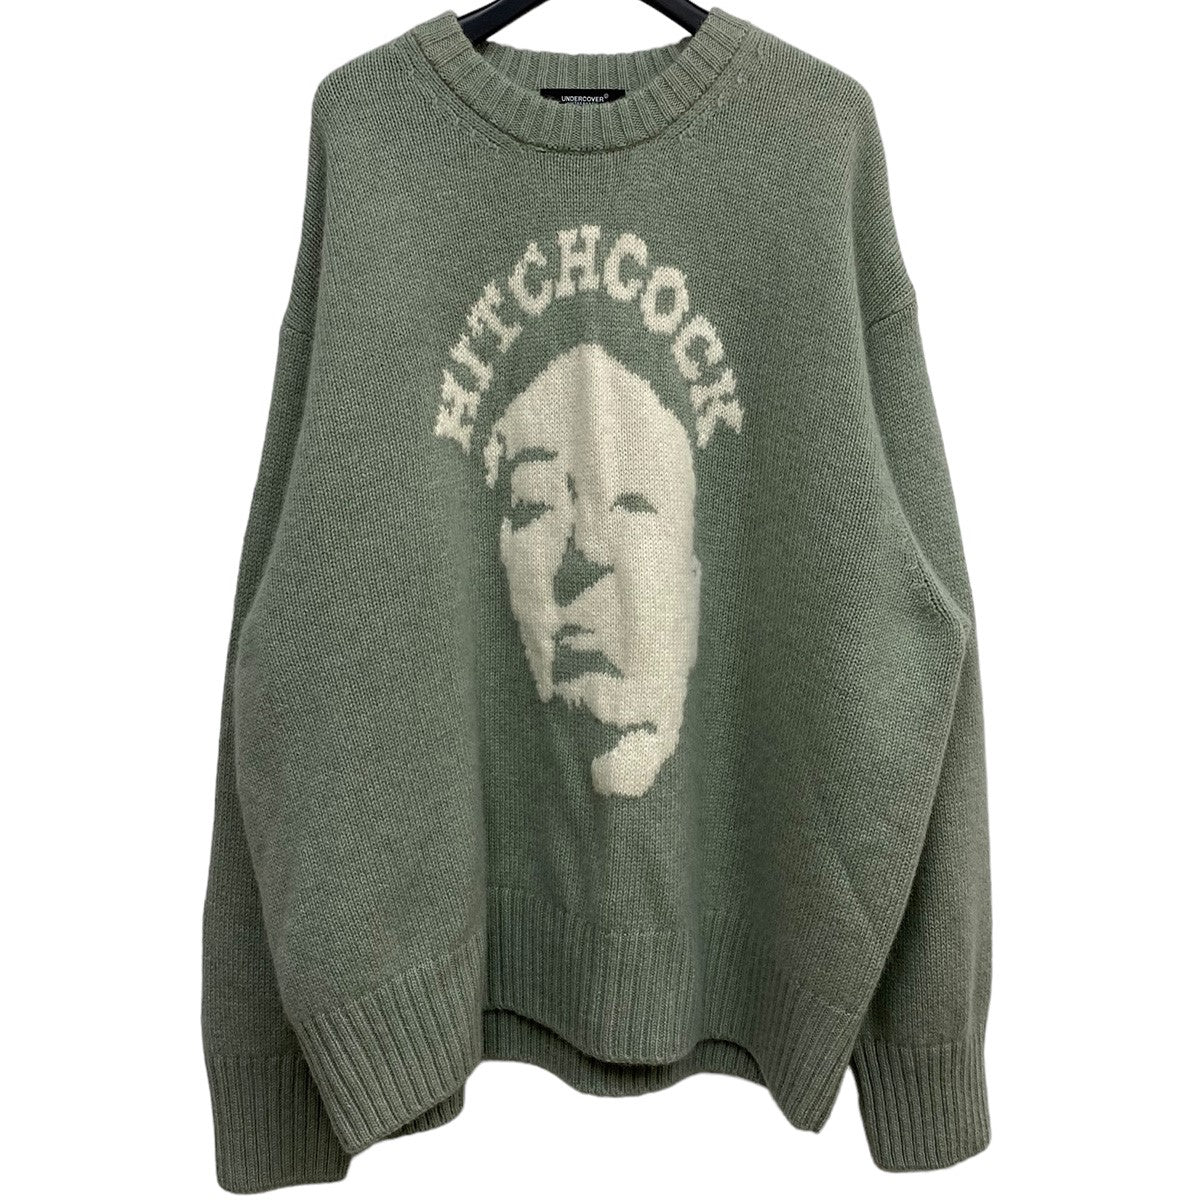 UNDER COVER×Alfred Hitchcock 22AW Hitchcock Face Crewneck  Knitヒッチコック刺繍ニットセーター ライトグリーン サイズ 13｜【公式】カインドオルオンライン ブランド古着・中古通販【kindal】